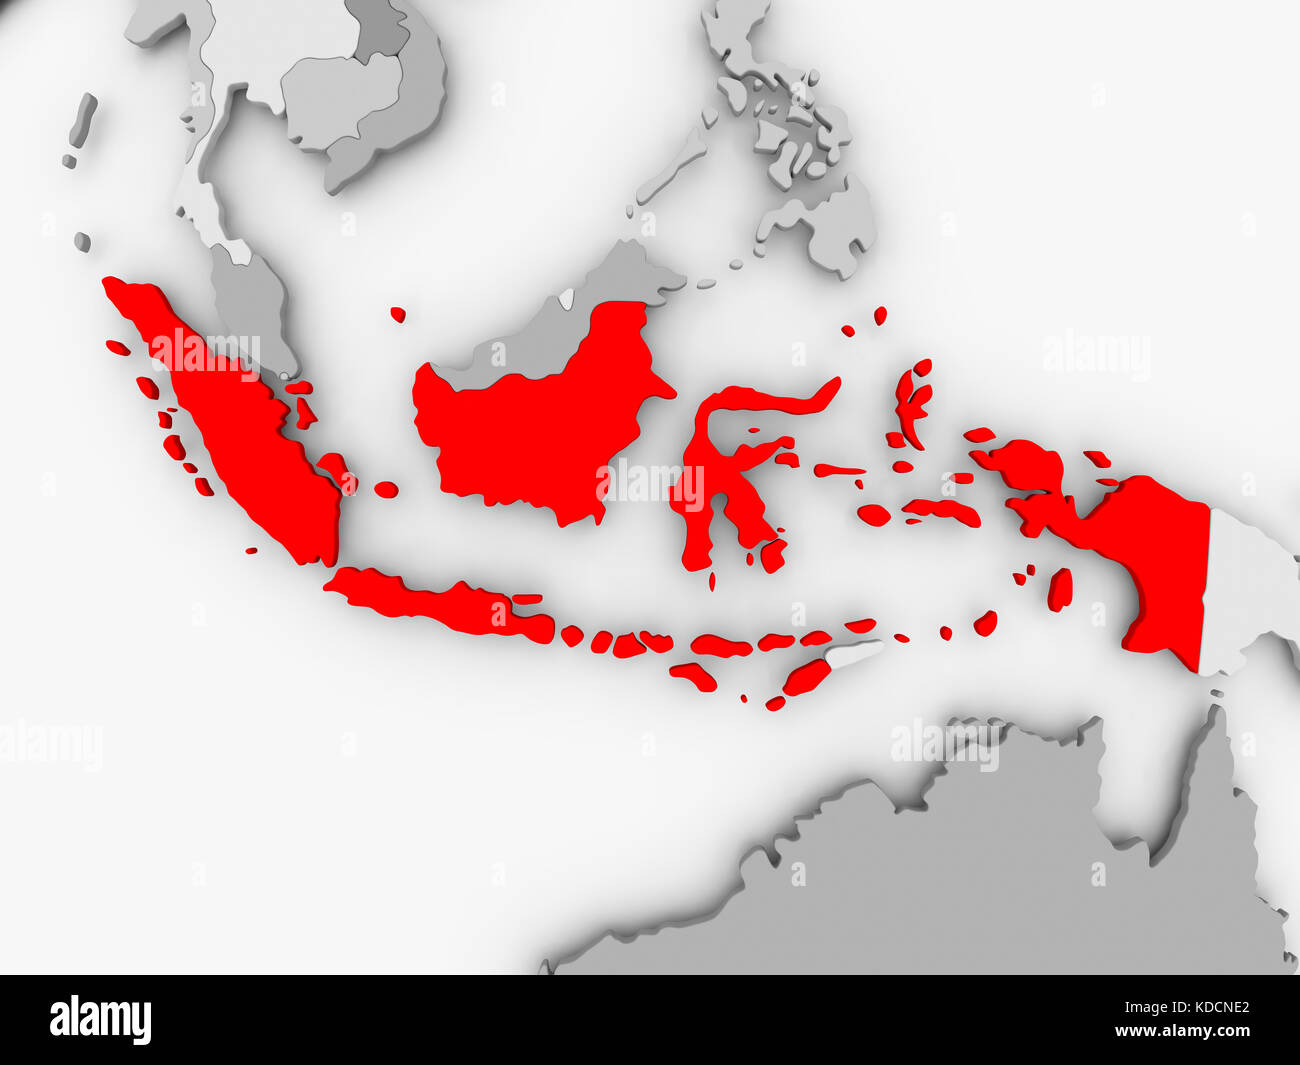 Indonesia in red on grey political map. 3D illustration. Stock Photo